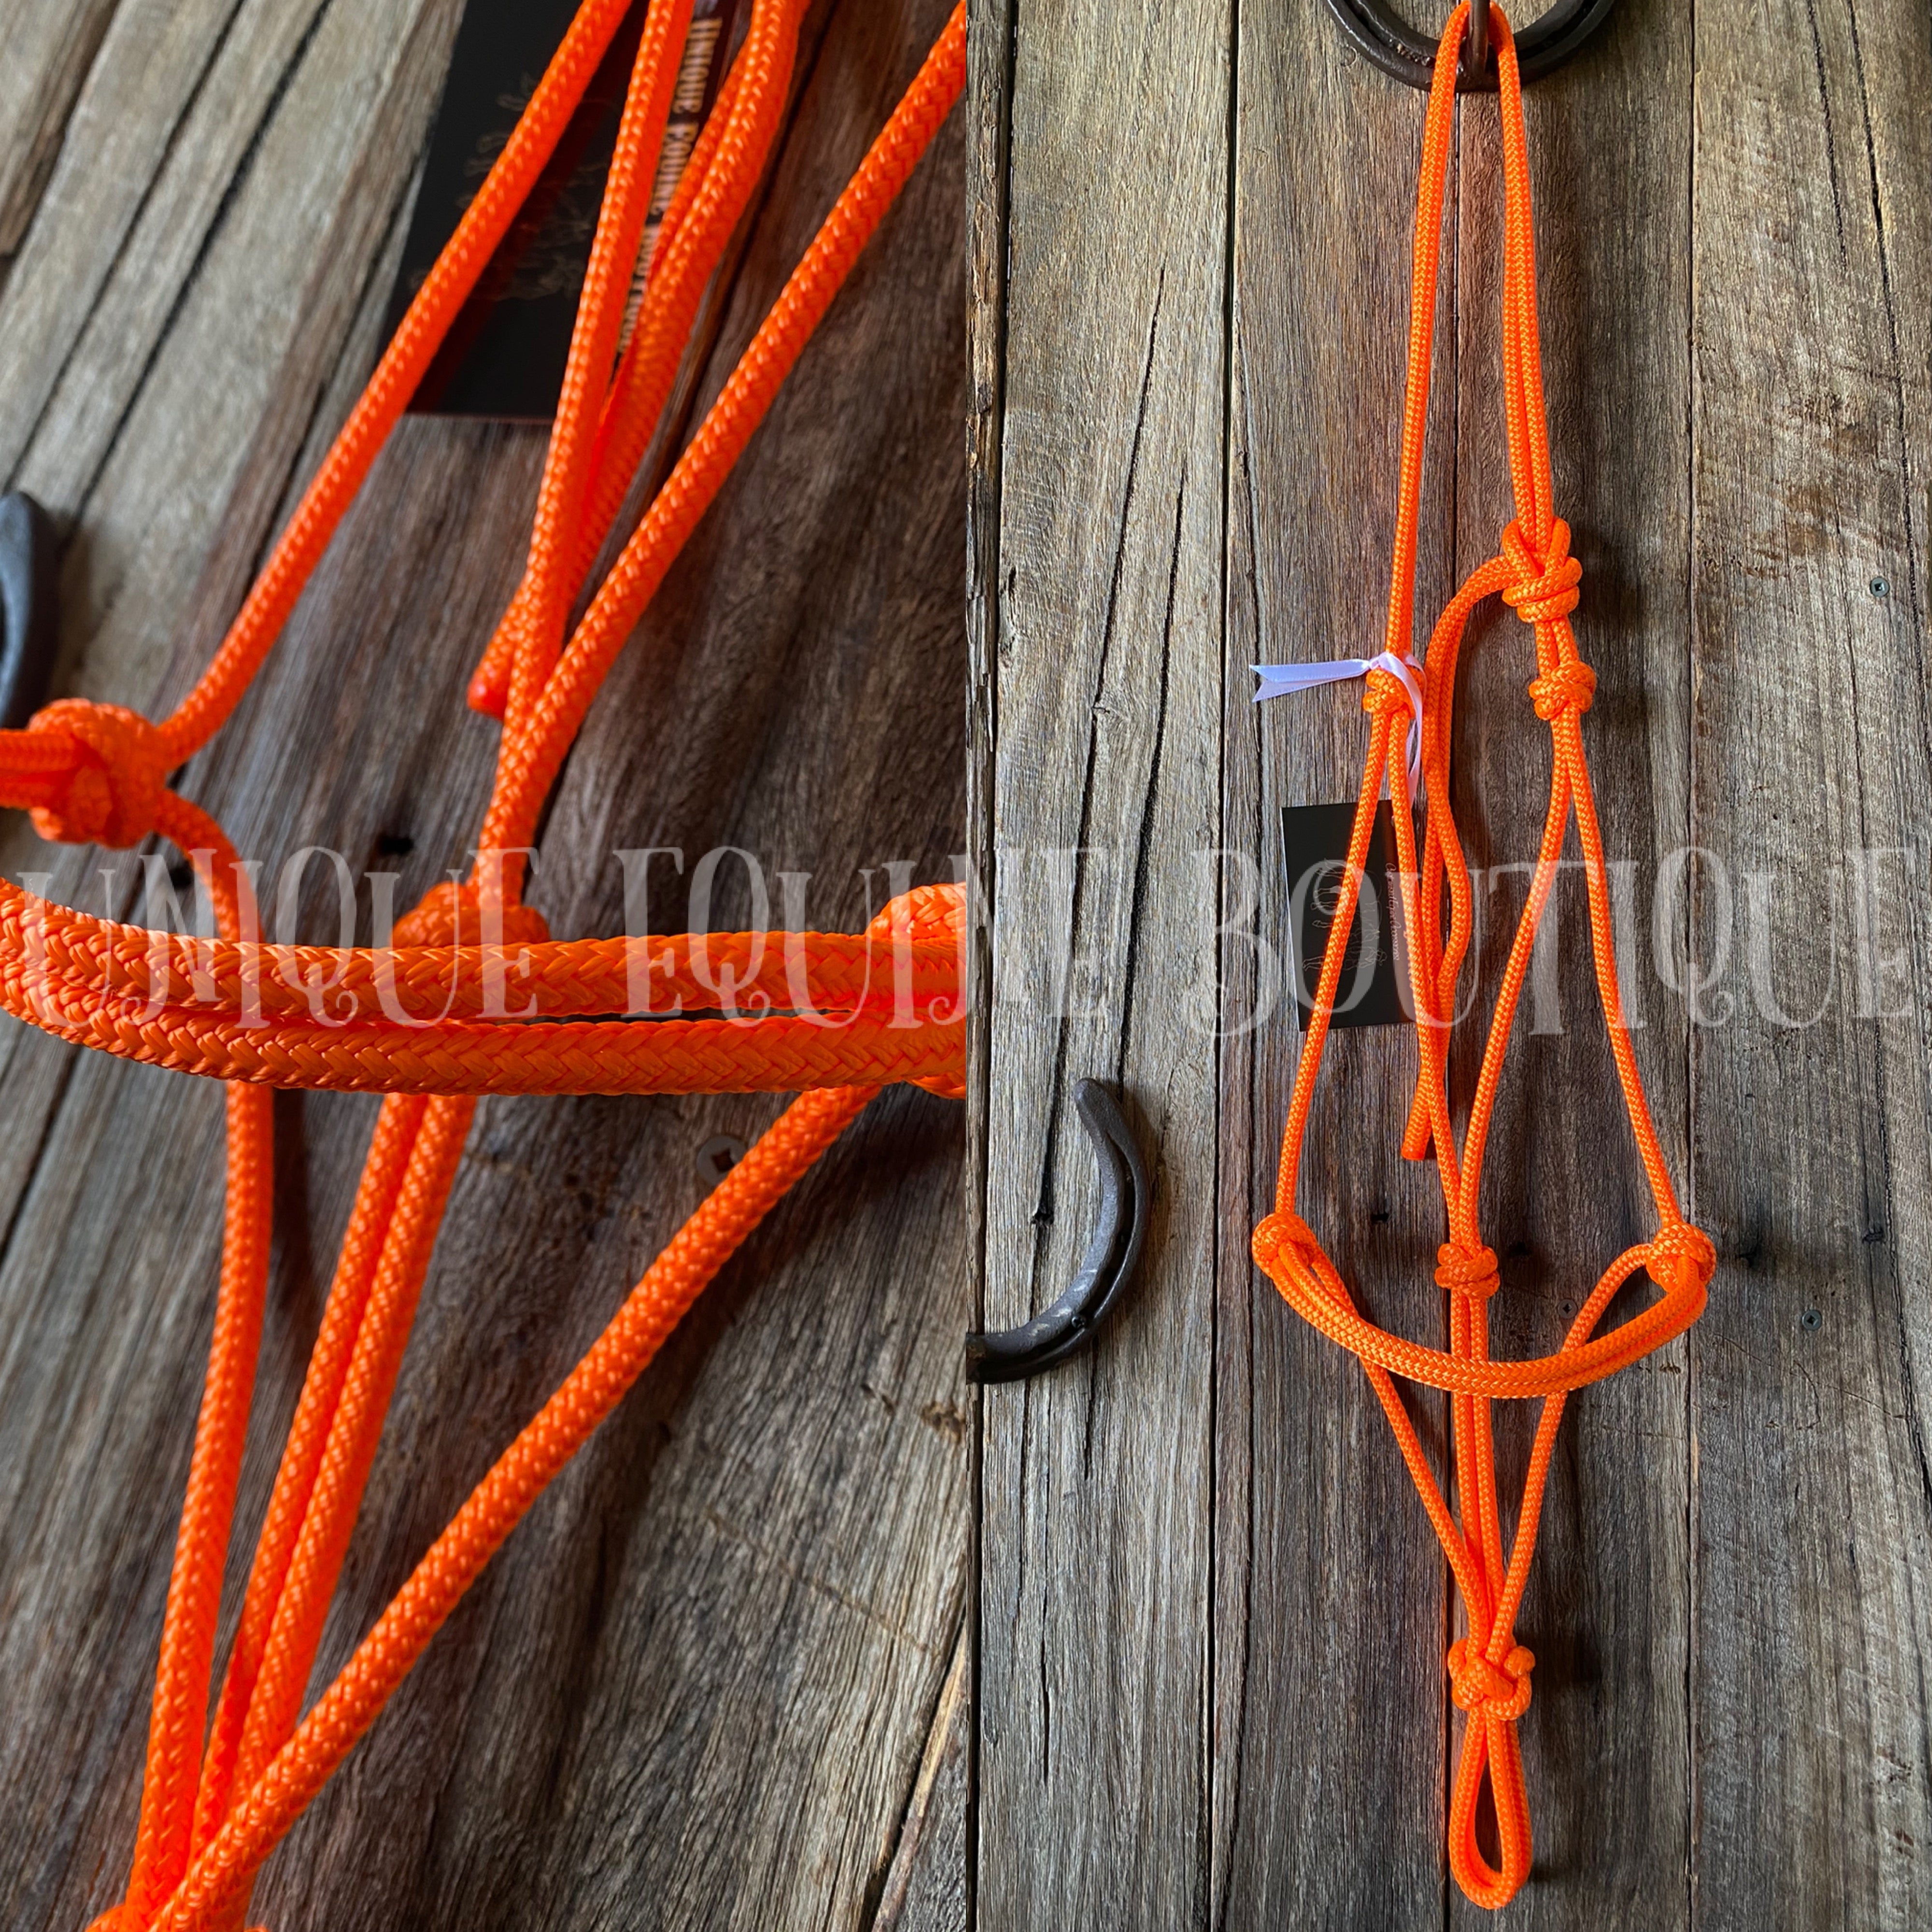 HORSE Size Rope Halters